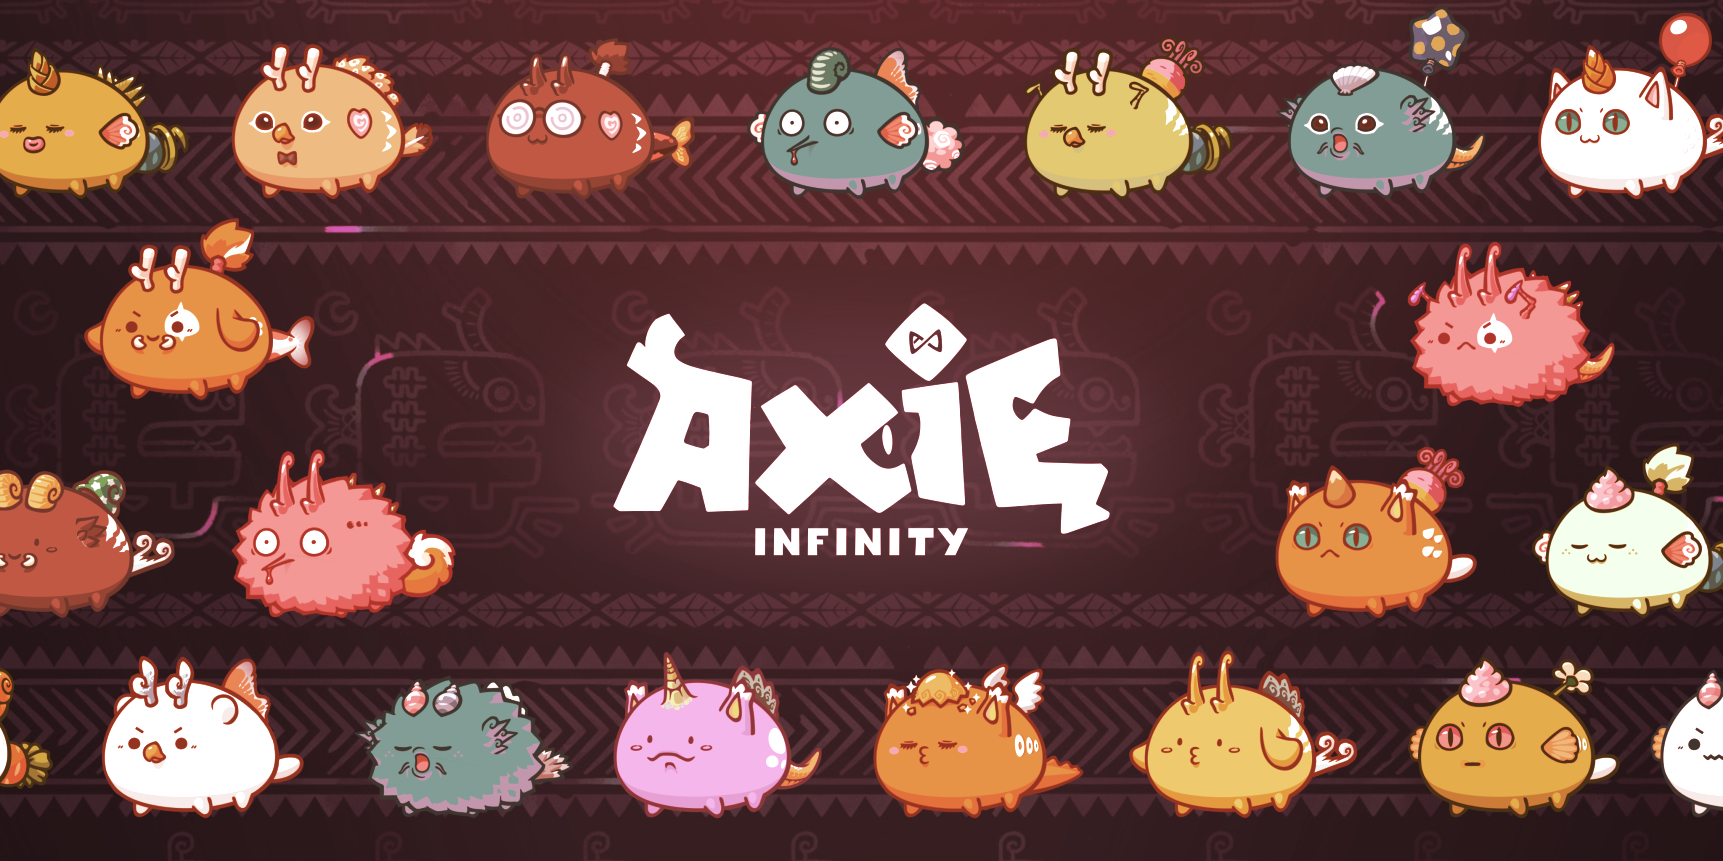 Axie Infinity is an increasingly popular Ethereum-based game. Image: Axie Infinity